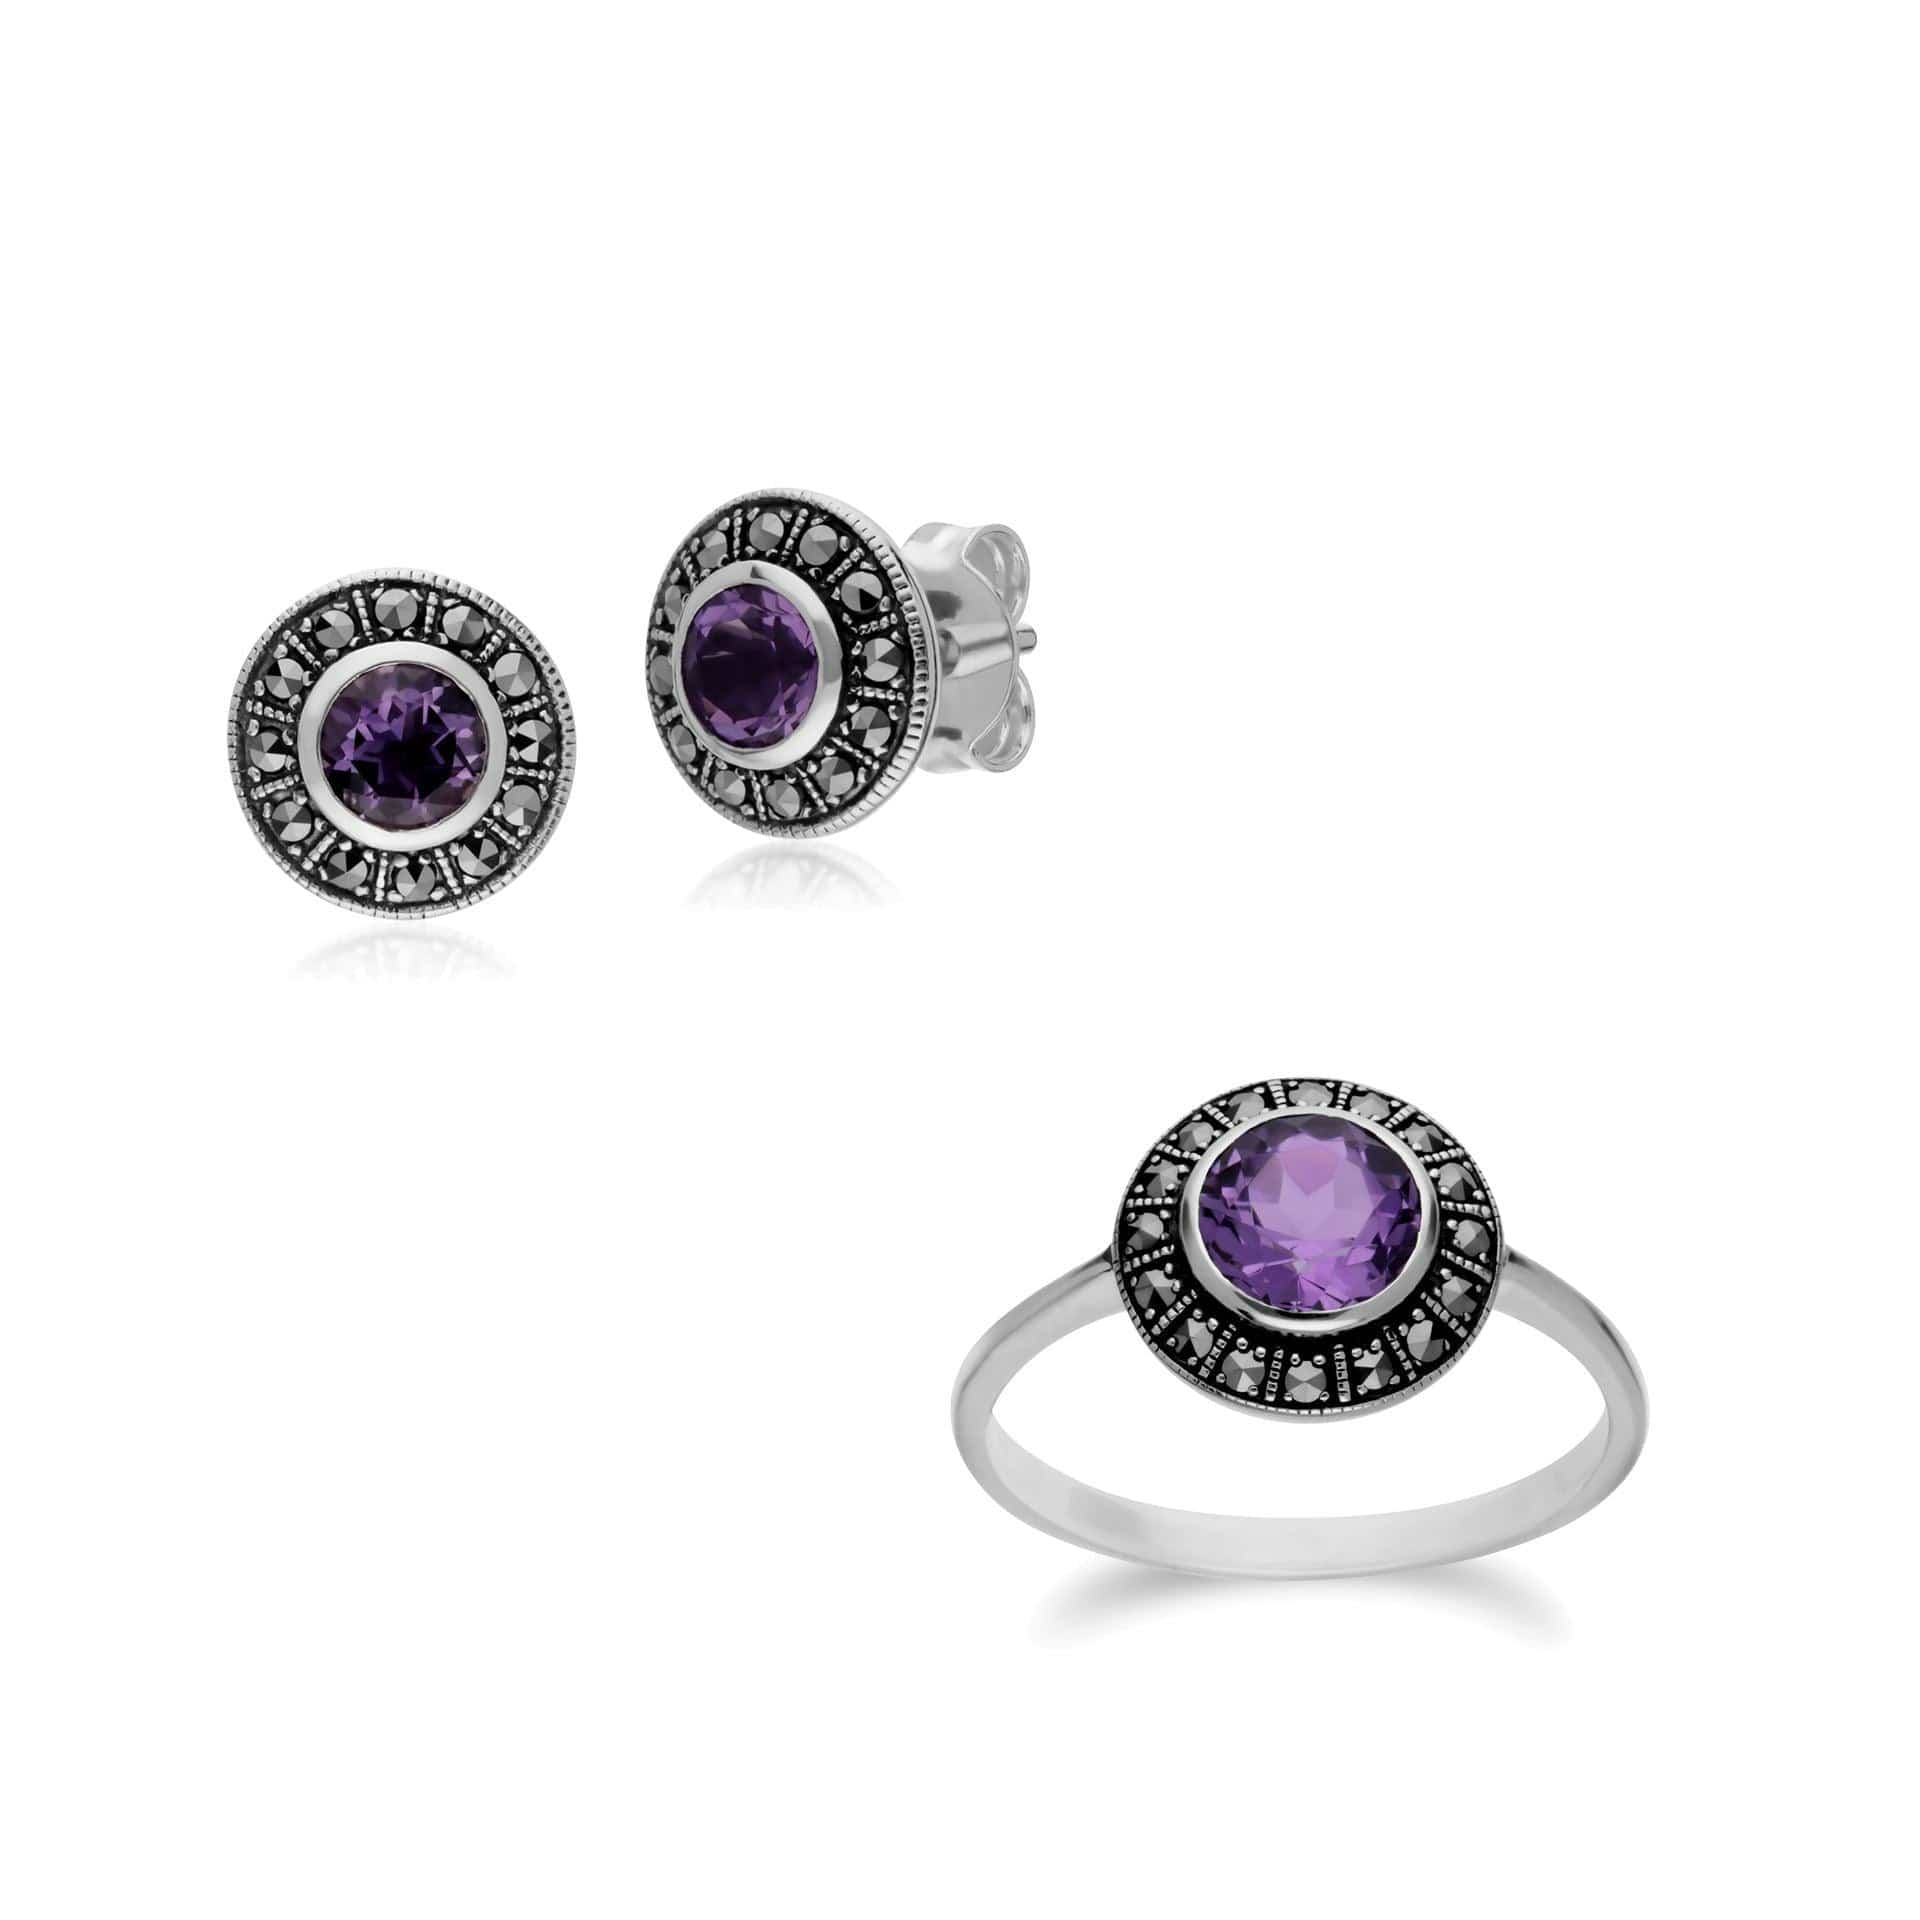 214E872701925-214R605601925 Art Deco Style Round Amethyst and Marcasite Cluster Stud Earrings & Ring Set in 925 Sterling Silver 1